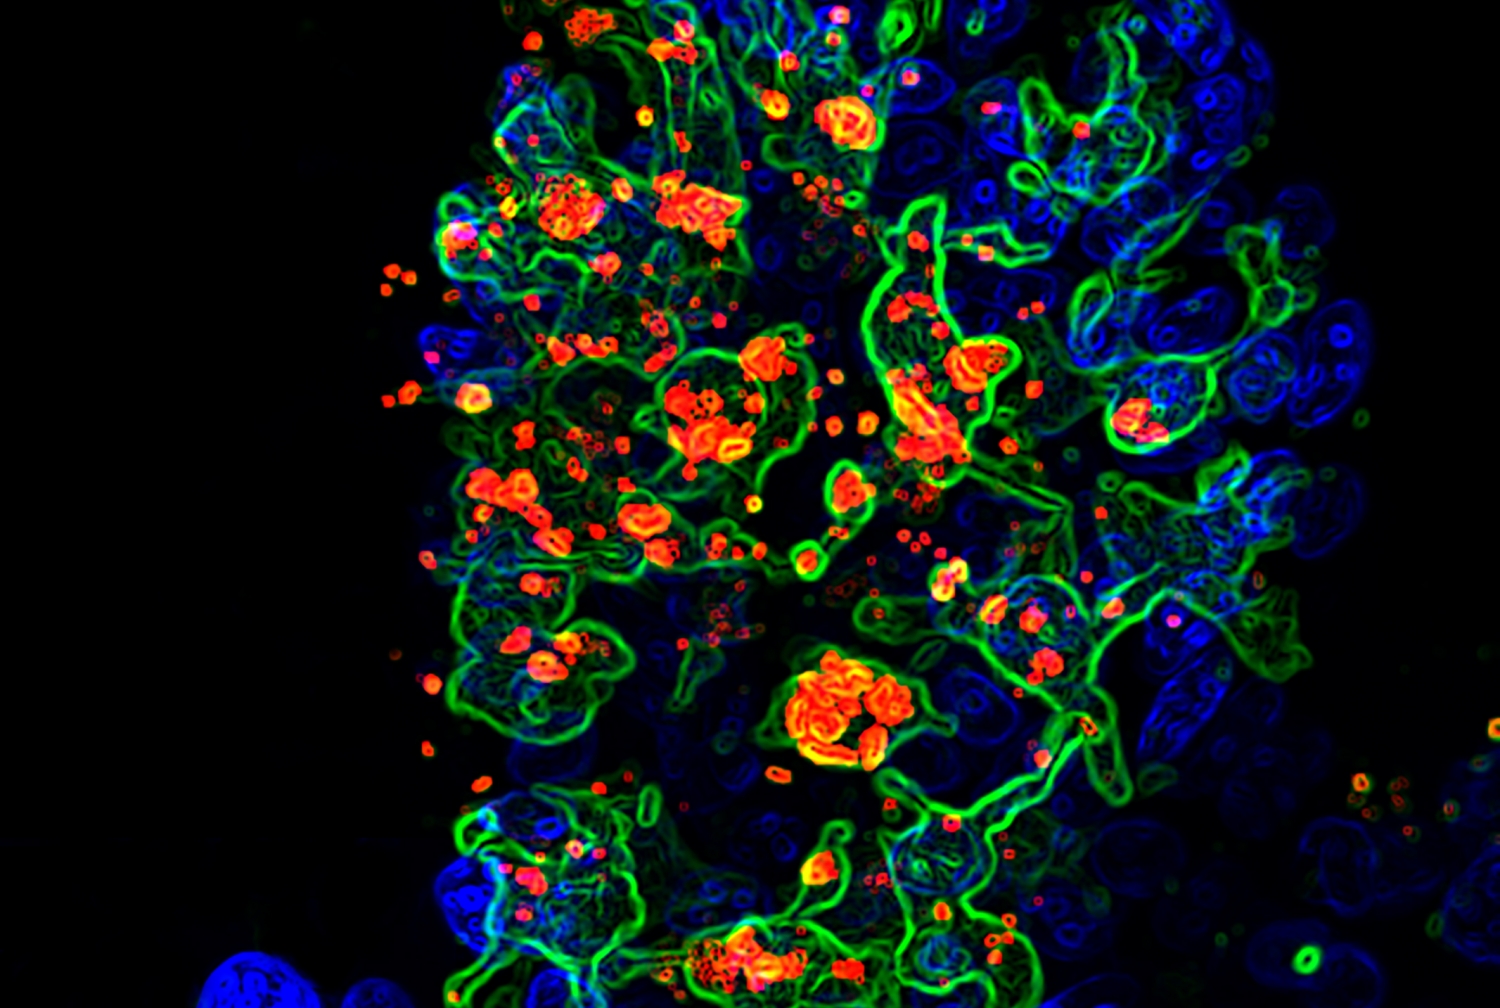 Opportunistic fungus called candida albicans (red) engulfed by CX3CR1+ phagocytes (green) in the gut villi (blue).Photo credit: Dr. Iliyan D. Iliev and Dr. Irina Leoanrdi. 